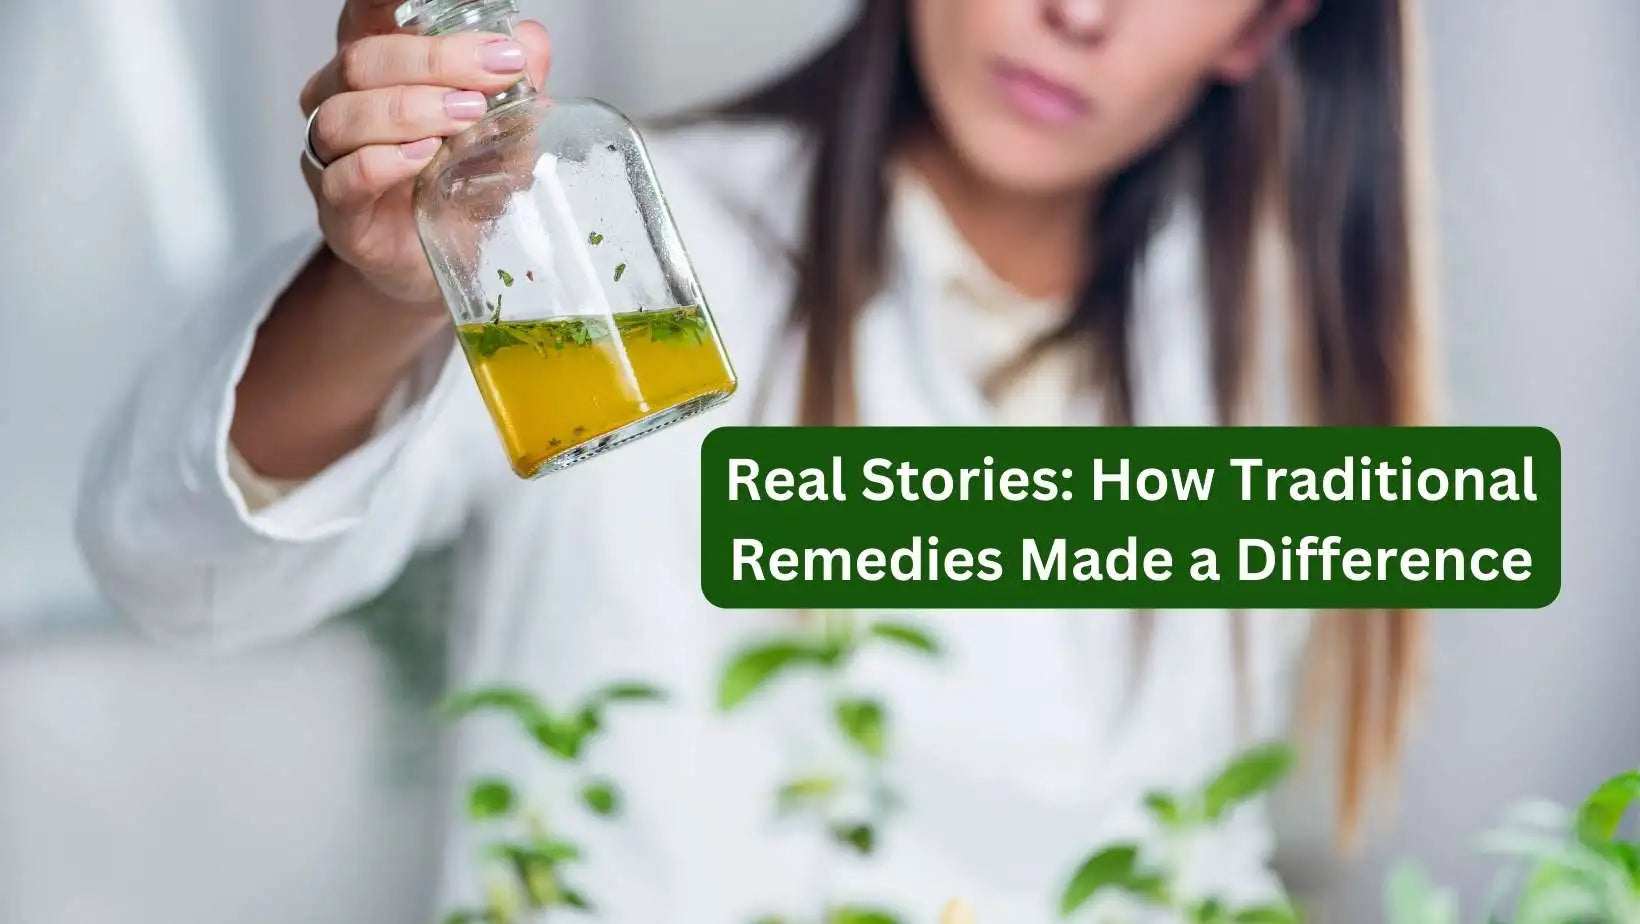 Real Stories: How Traditional Remedies Made a Difference